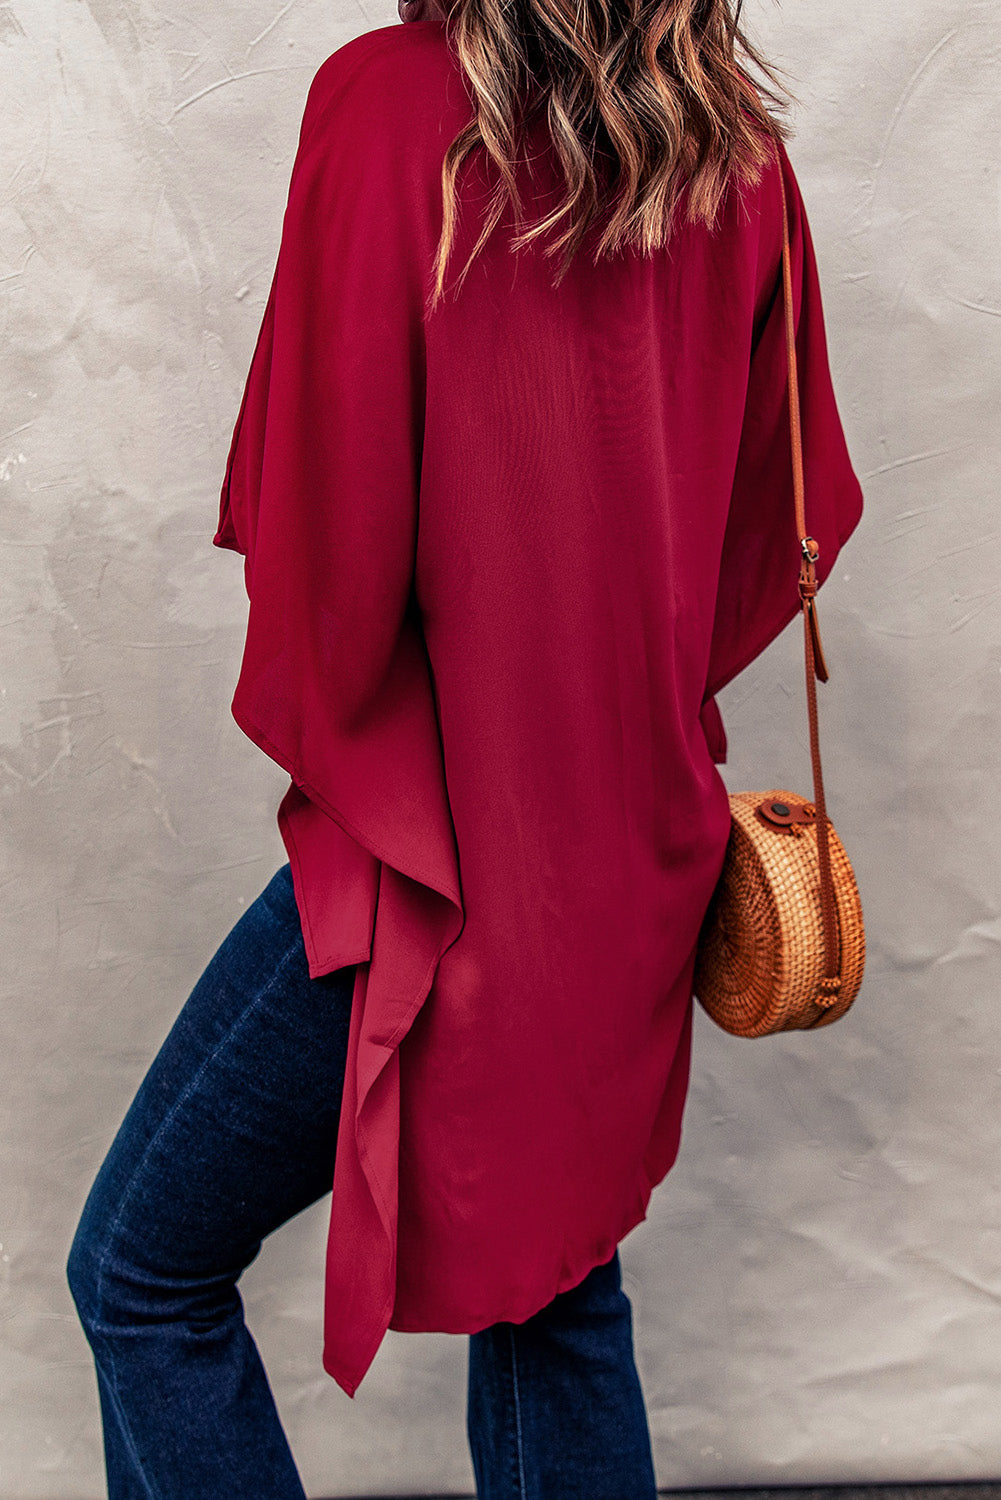 Burgundy Chic High Low Flowy Style Blouses Top